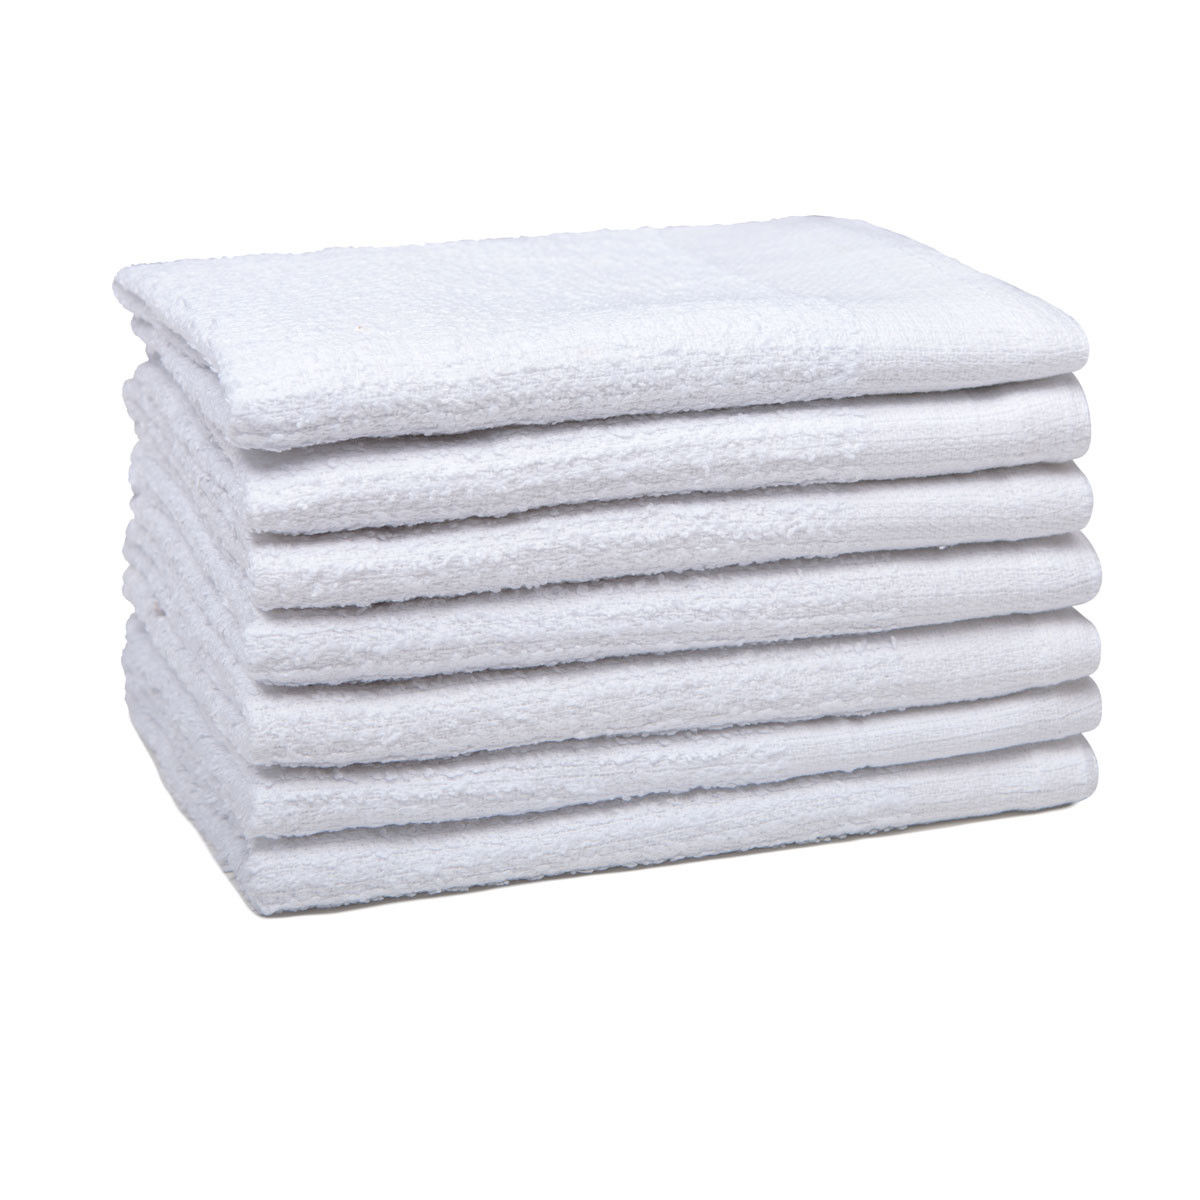 What types of bar towels are offered in Intralin's Wholesale Bar Mop Towels collection?